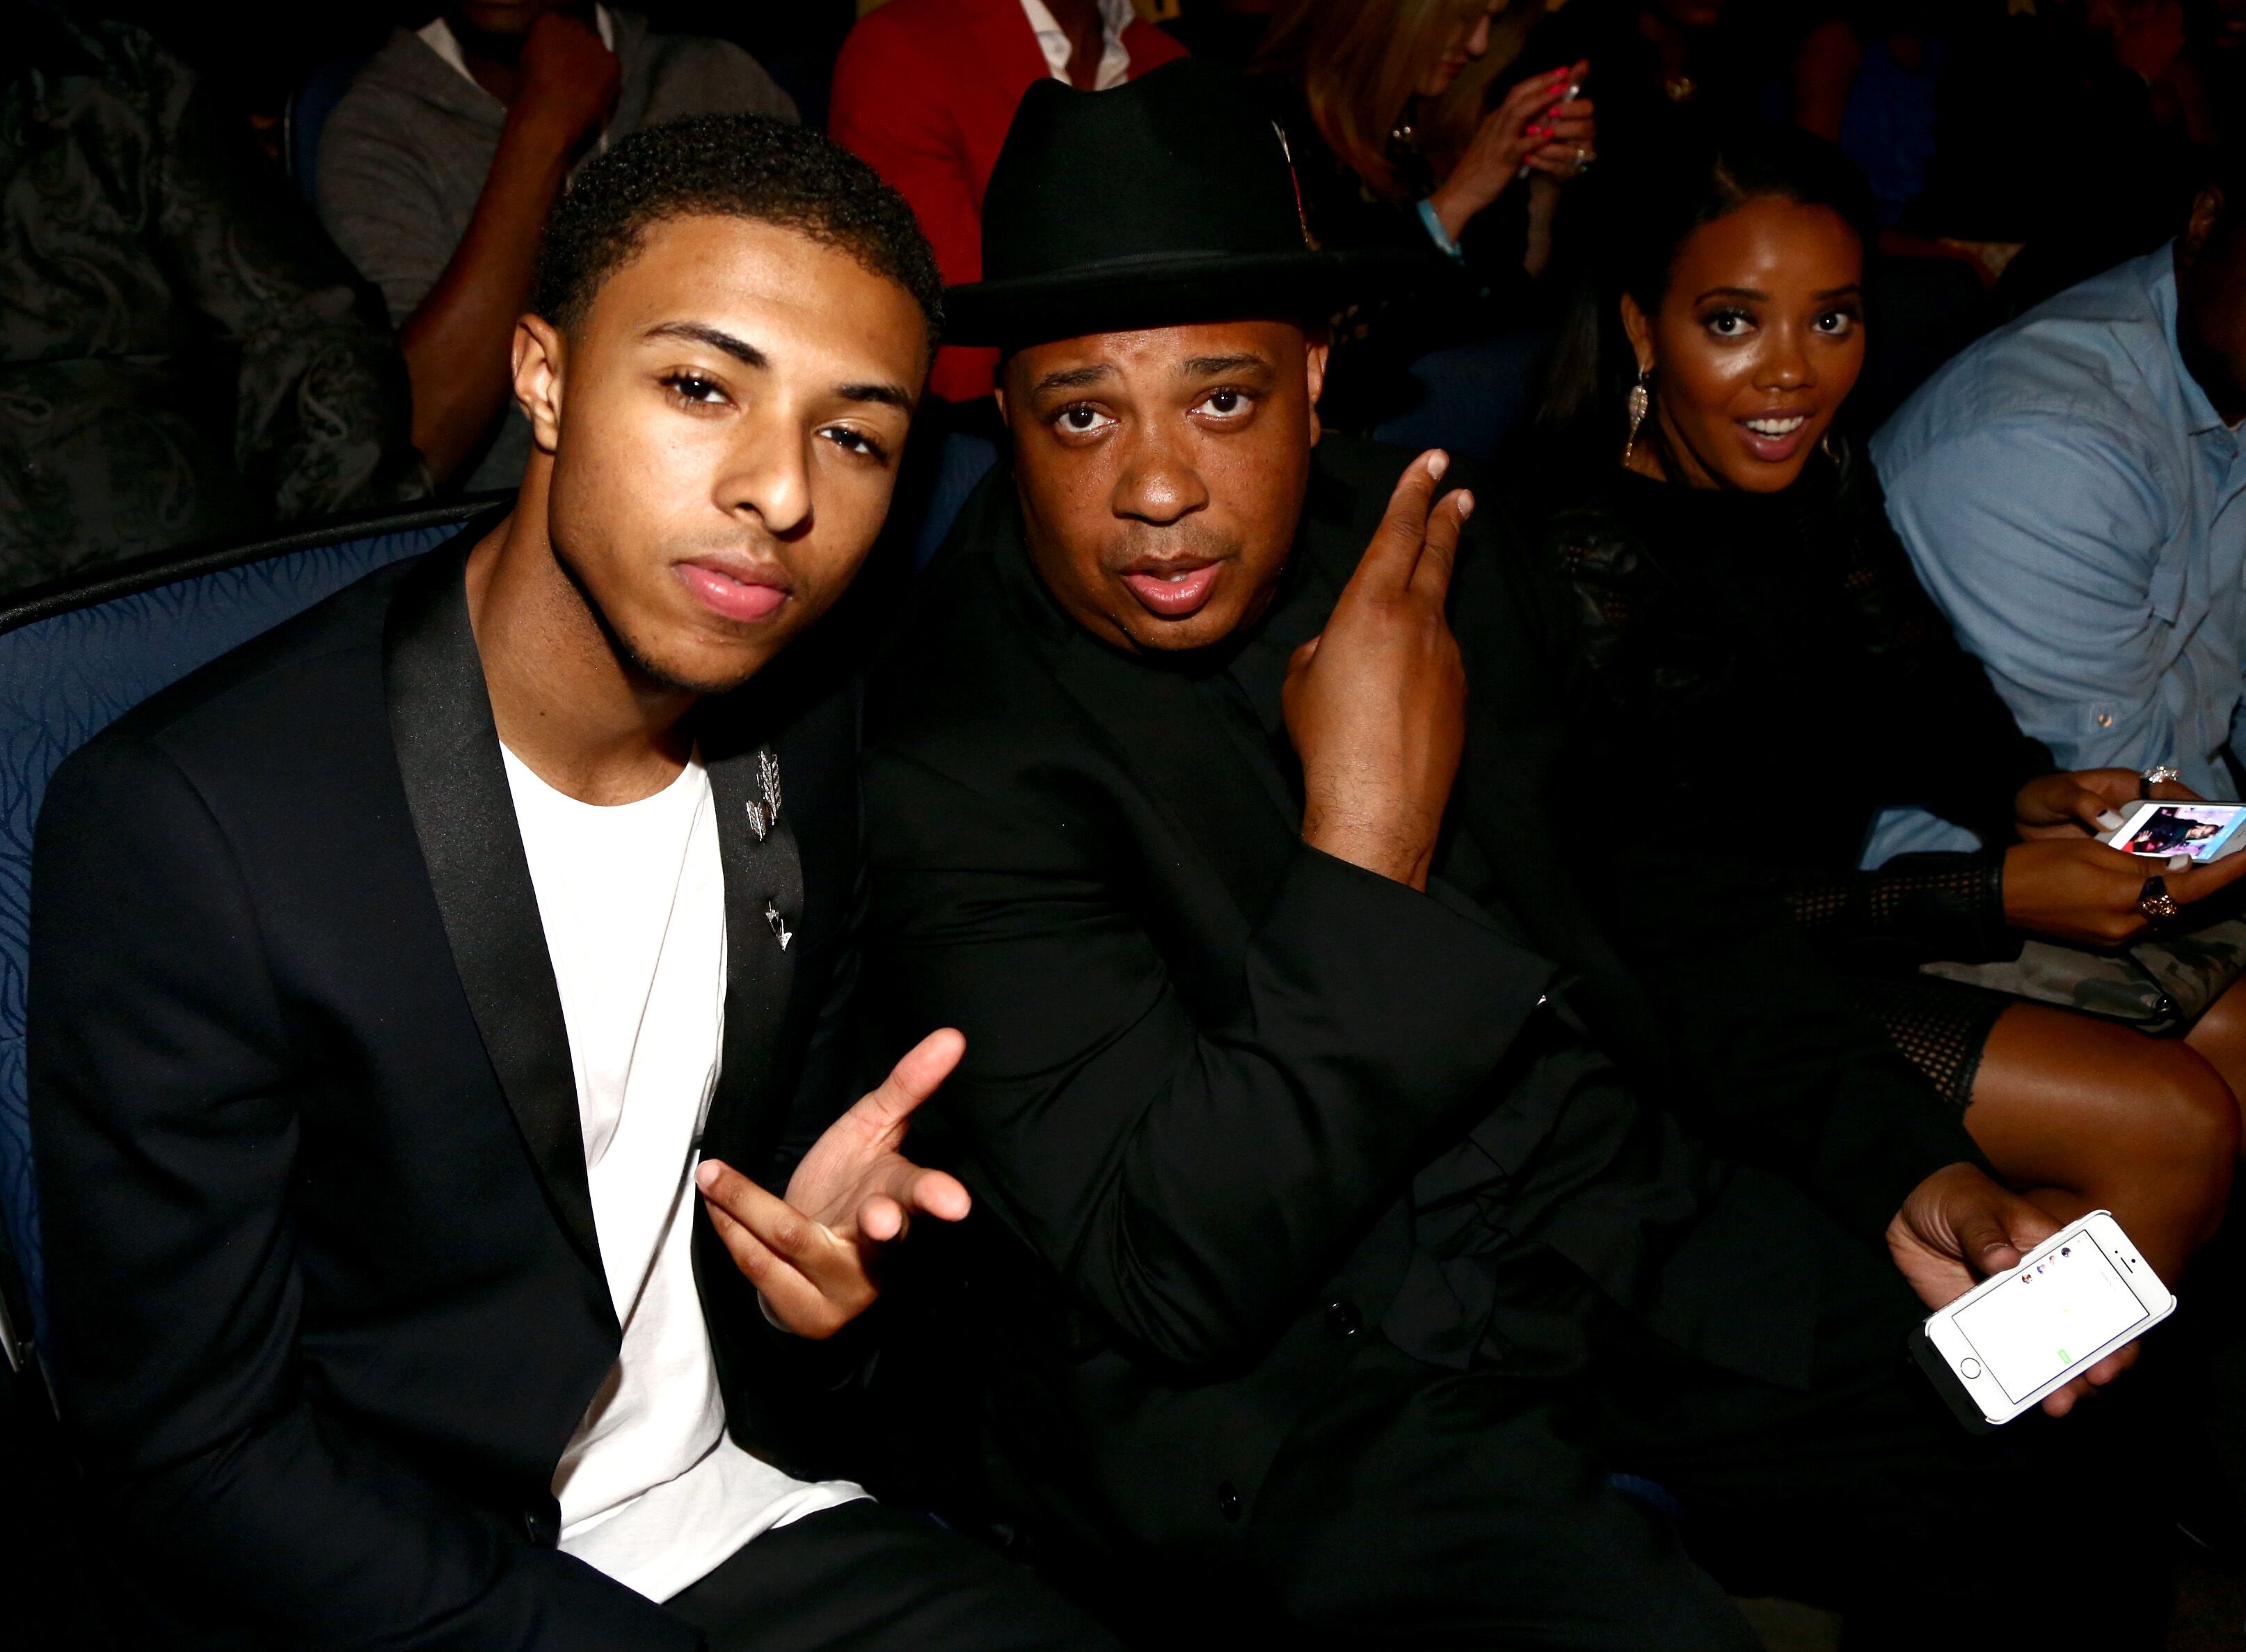 Rev Run with his son Diggy | Source: Getty Images/GlobalImagesUkraine